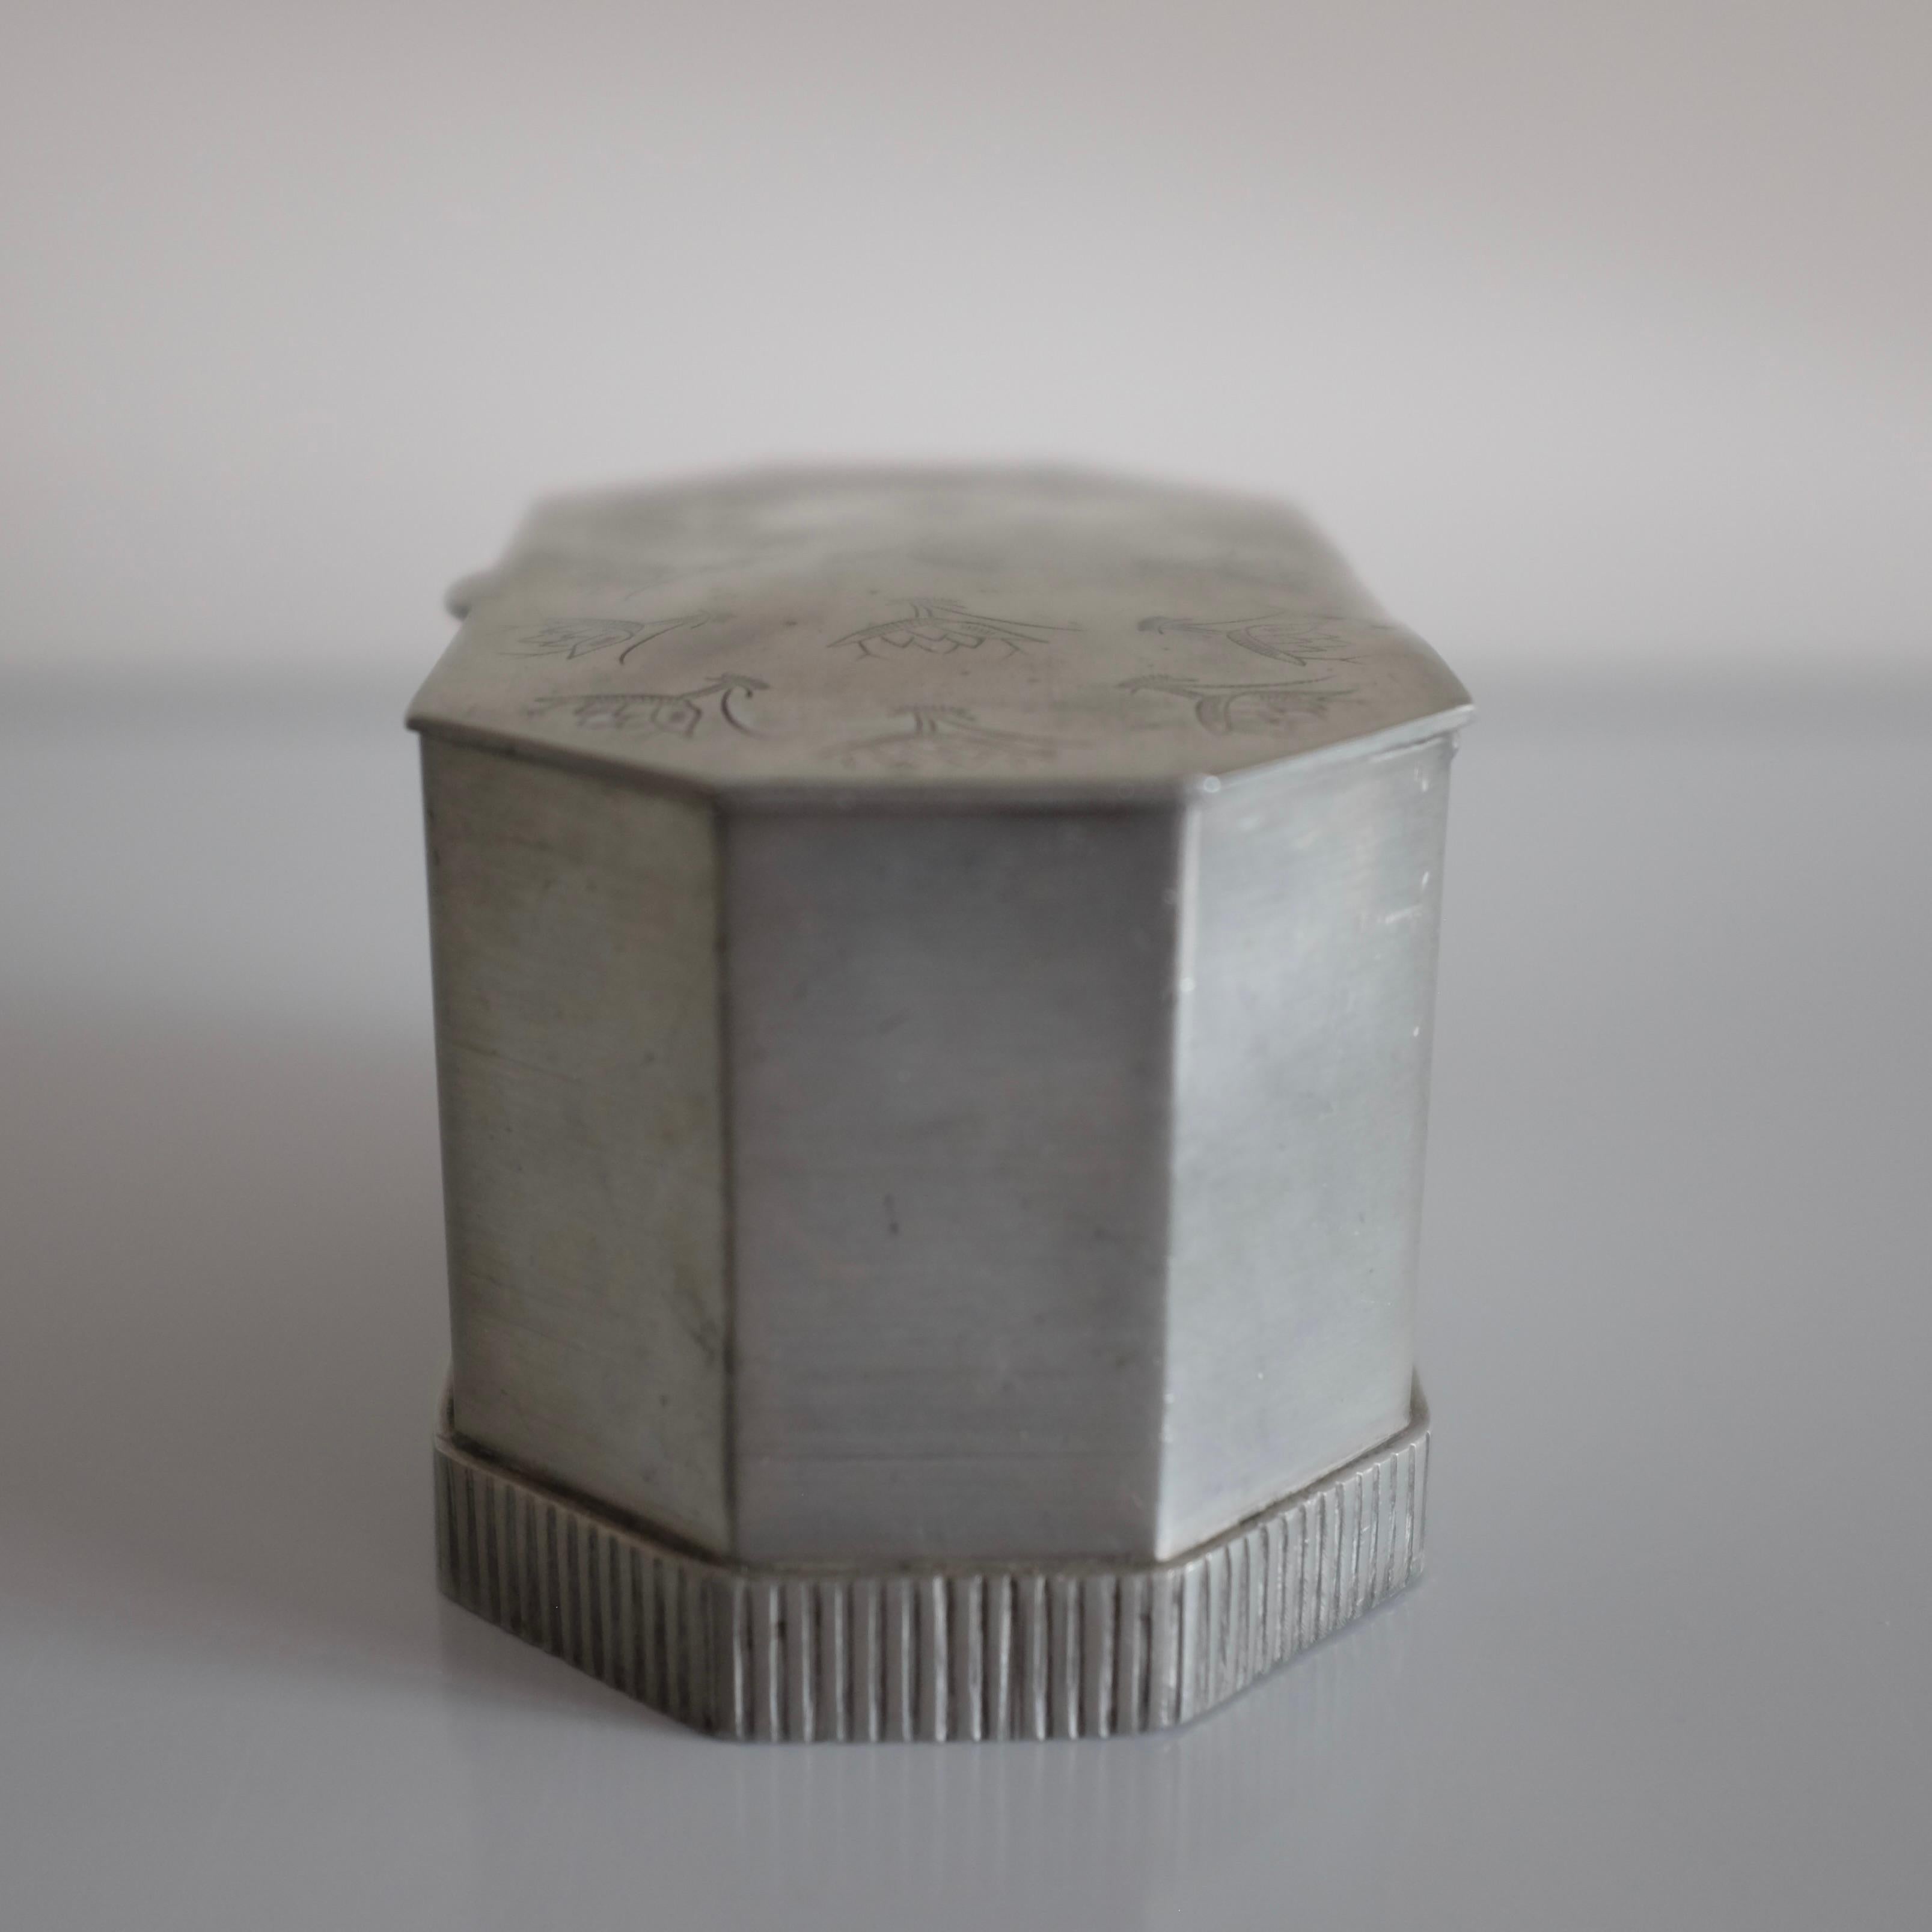 Rare 1931 Pewter box by GAB, Sweden. Octagon shaped body with a decorative flower motif engraved on the lid and inside is lined with purple textil. Age appropriate wear to the pewter.

Country: Sweden

Maker: GAB Svenskt Tenn

Year: 1931 

Material: